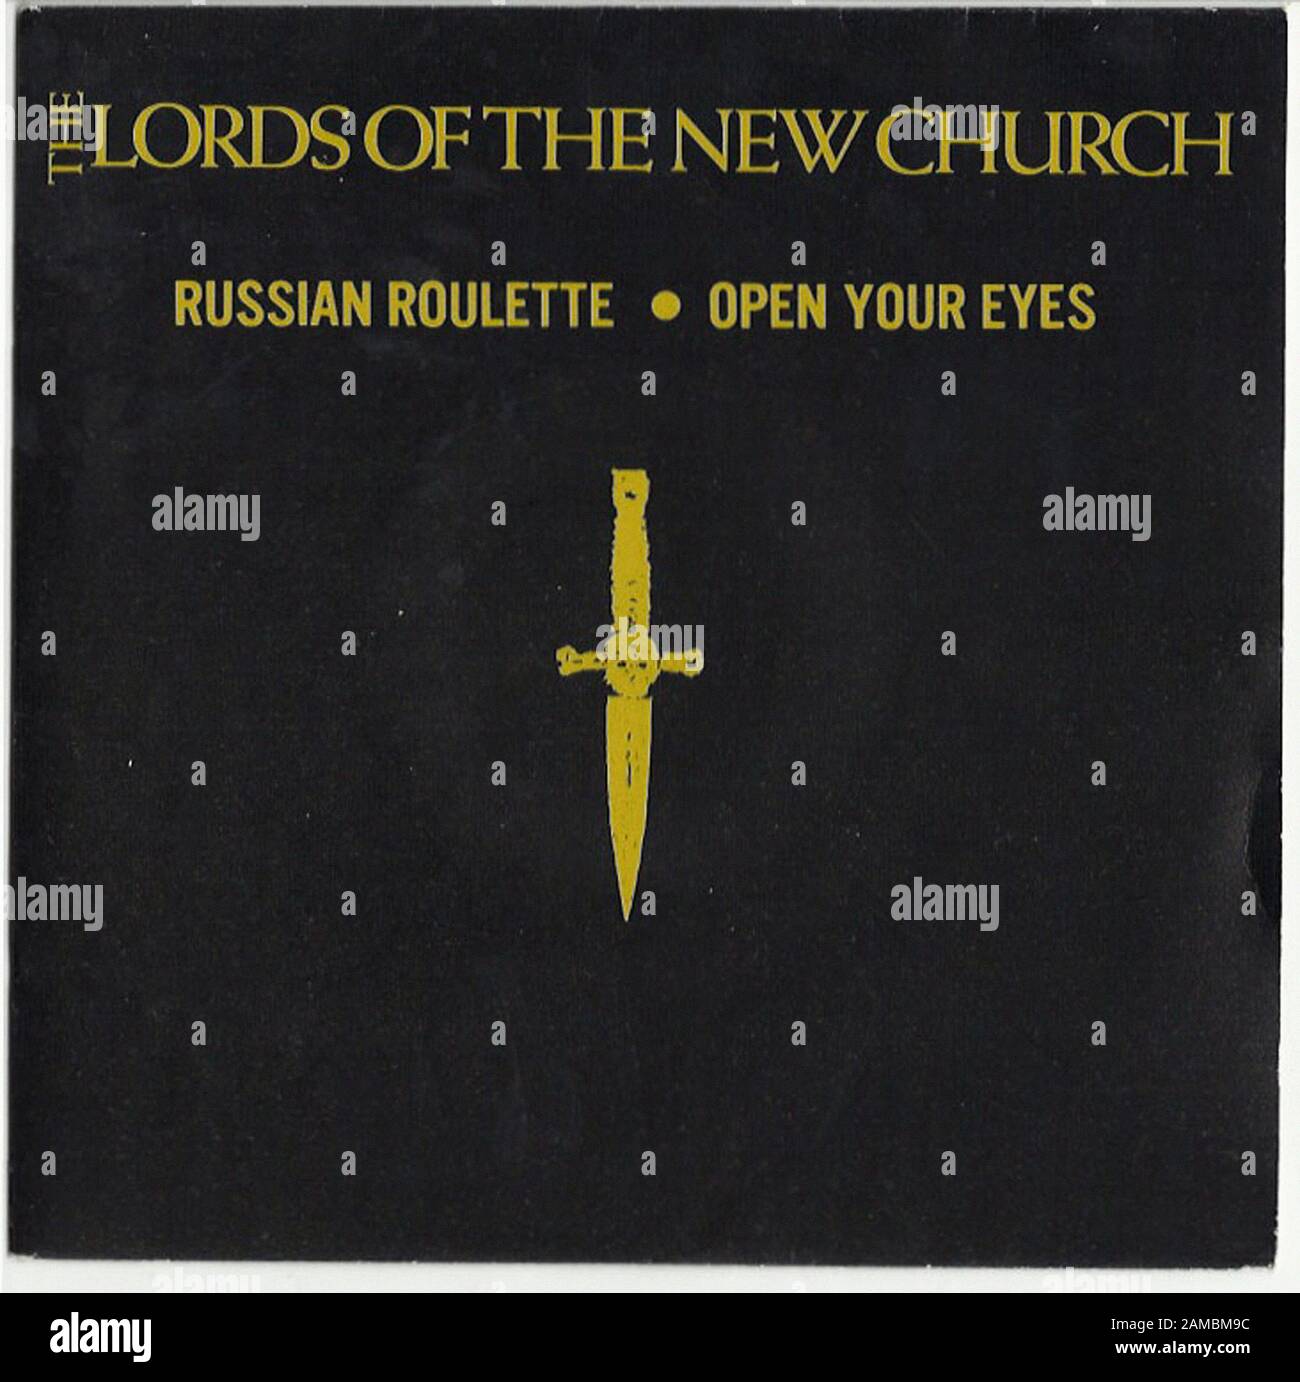 Buy The Lords of the New Church Russian Roulette Vintage Tee